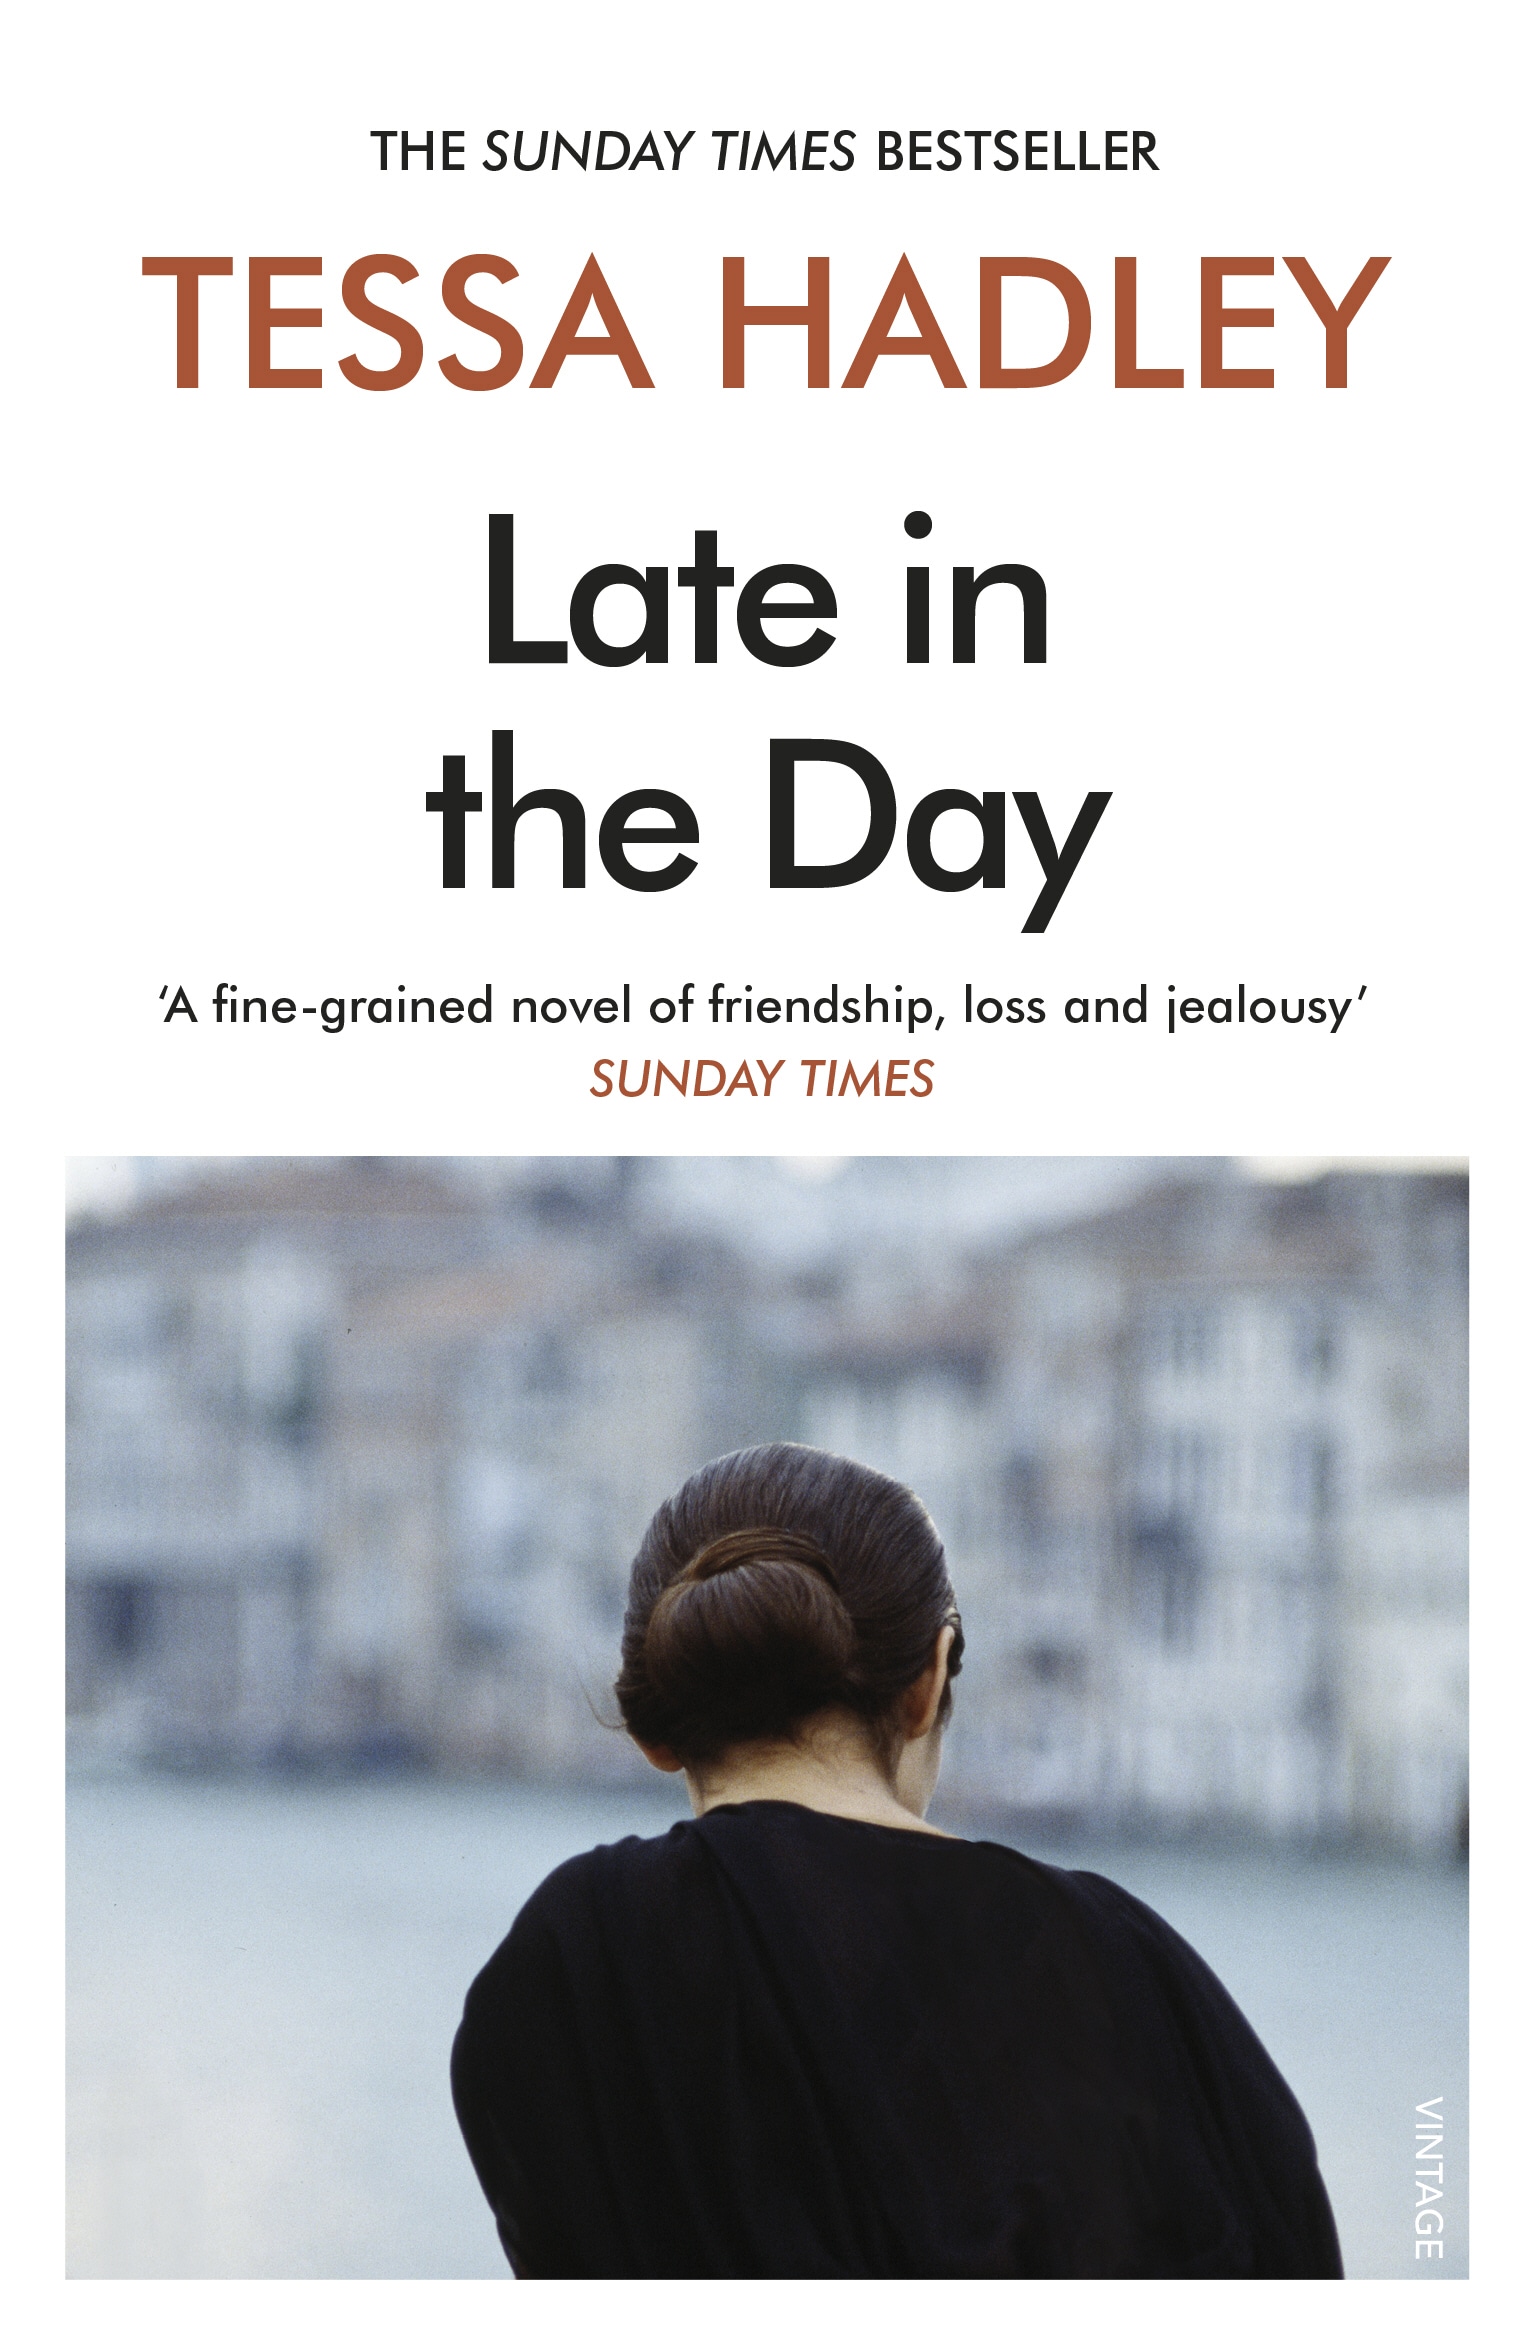 Book “Late in the Day” by Tessa Hadley — February 13, 2020